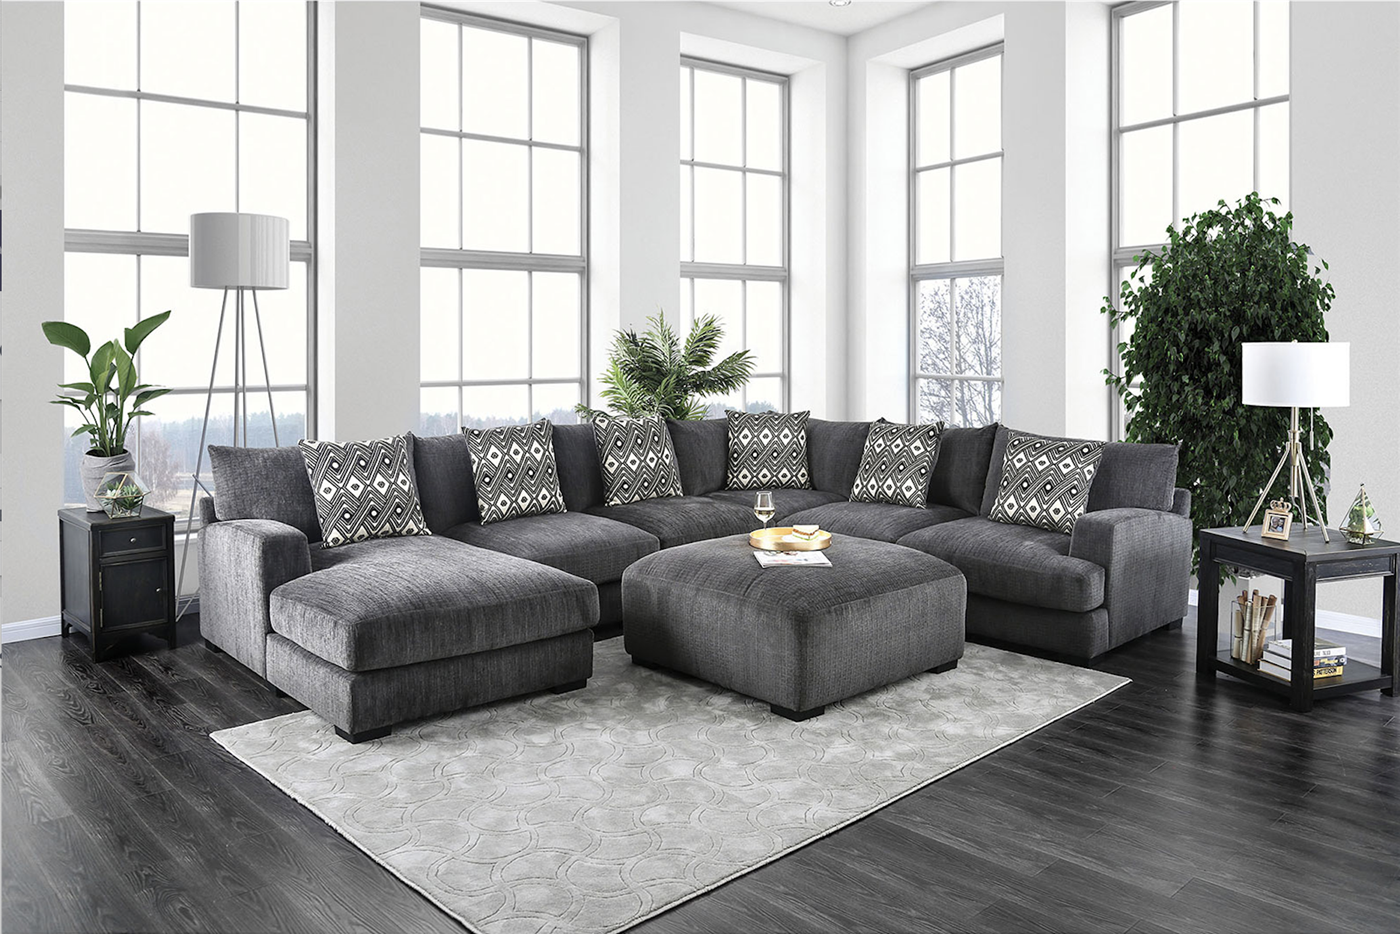 Kaylee Contemporary Gray Fabric Upholstered Large Scale U Shape Sectional By Furniture Of America Cm6587 Left Facing Chaise When